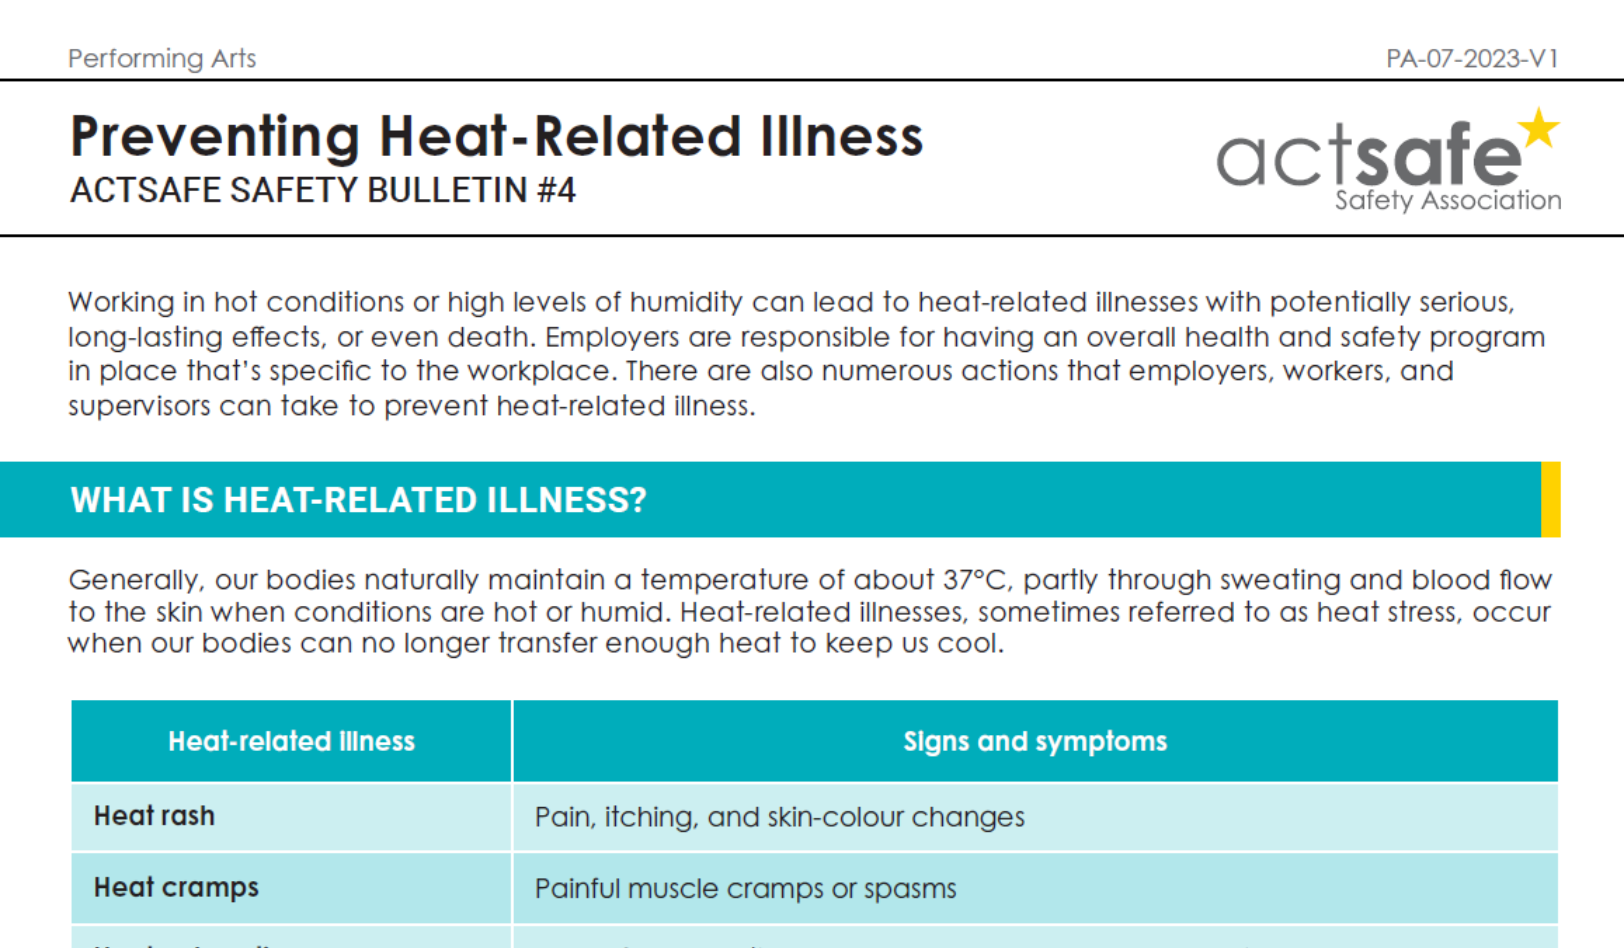 #4 Preventing Heat-Related Illness – Performing Arts